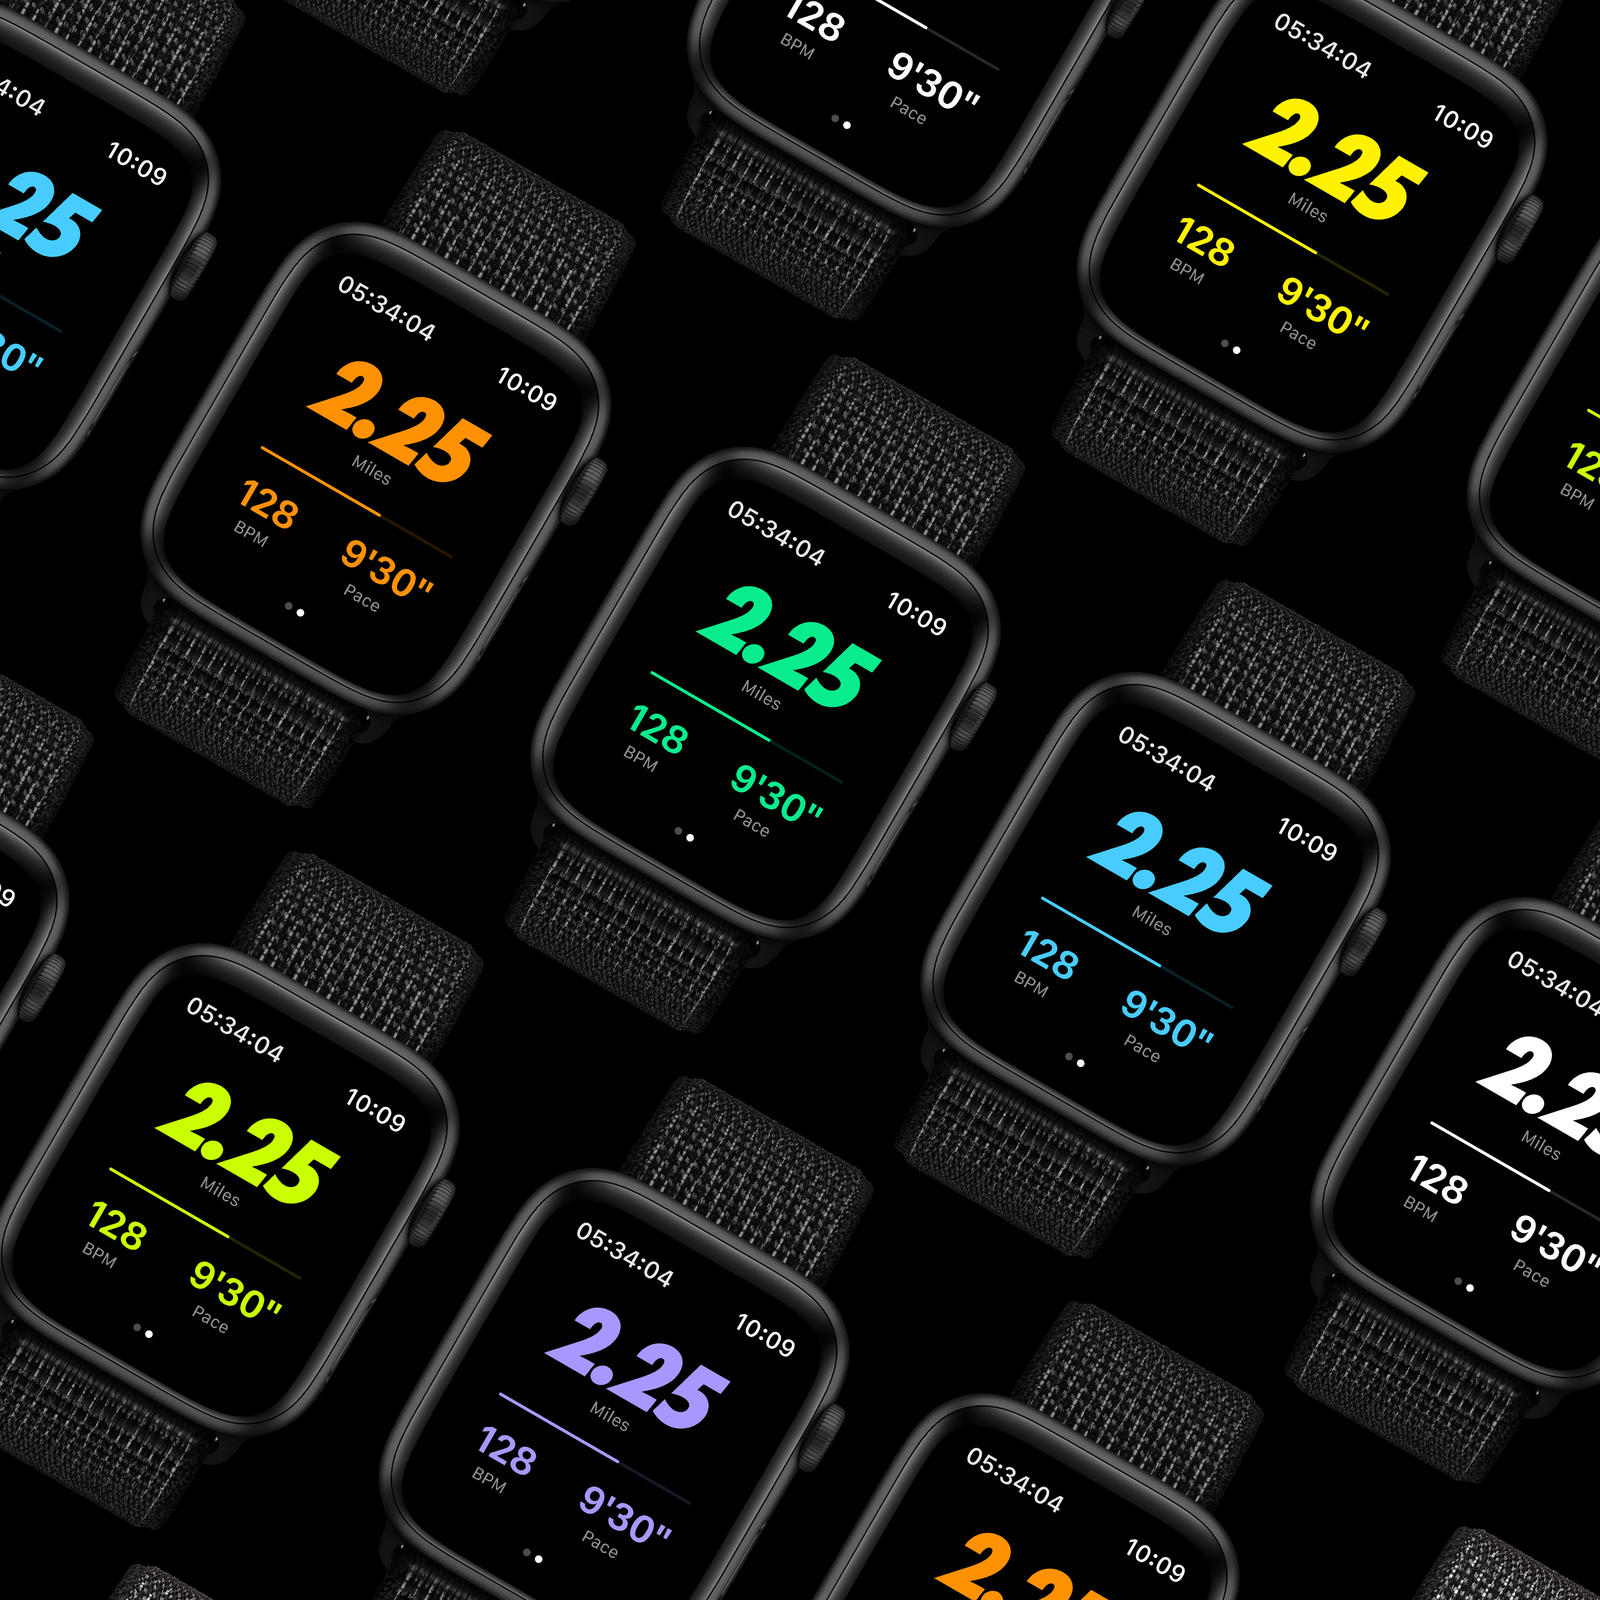 nike running apple watch without iphone